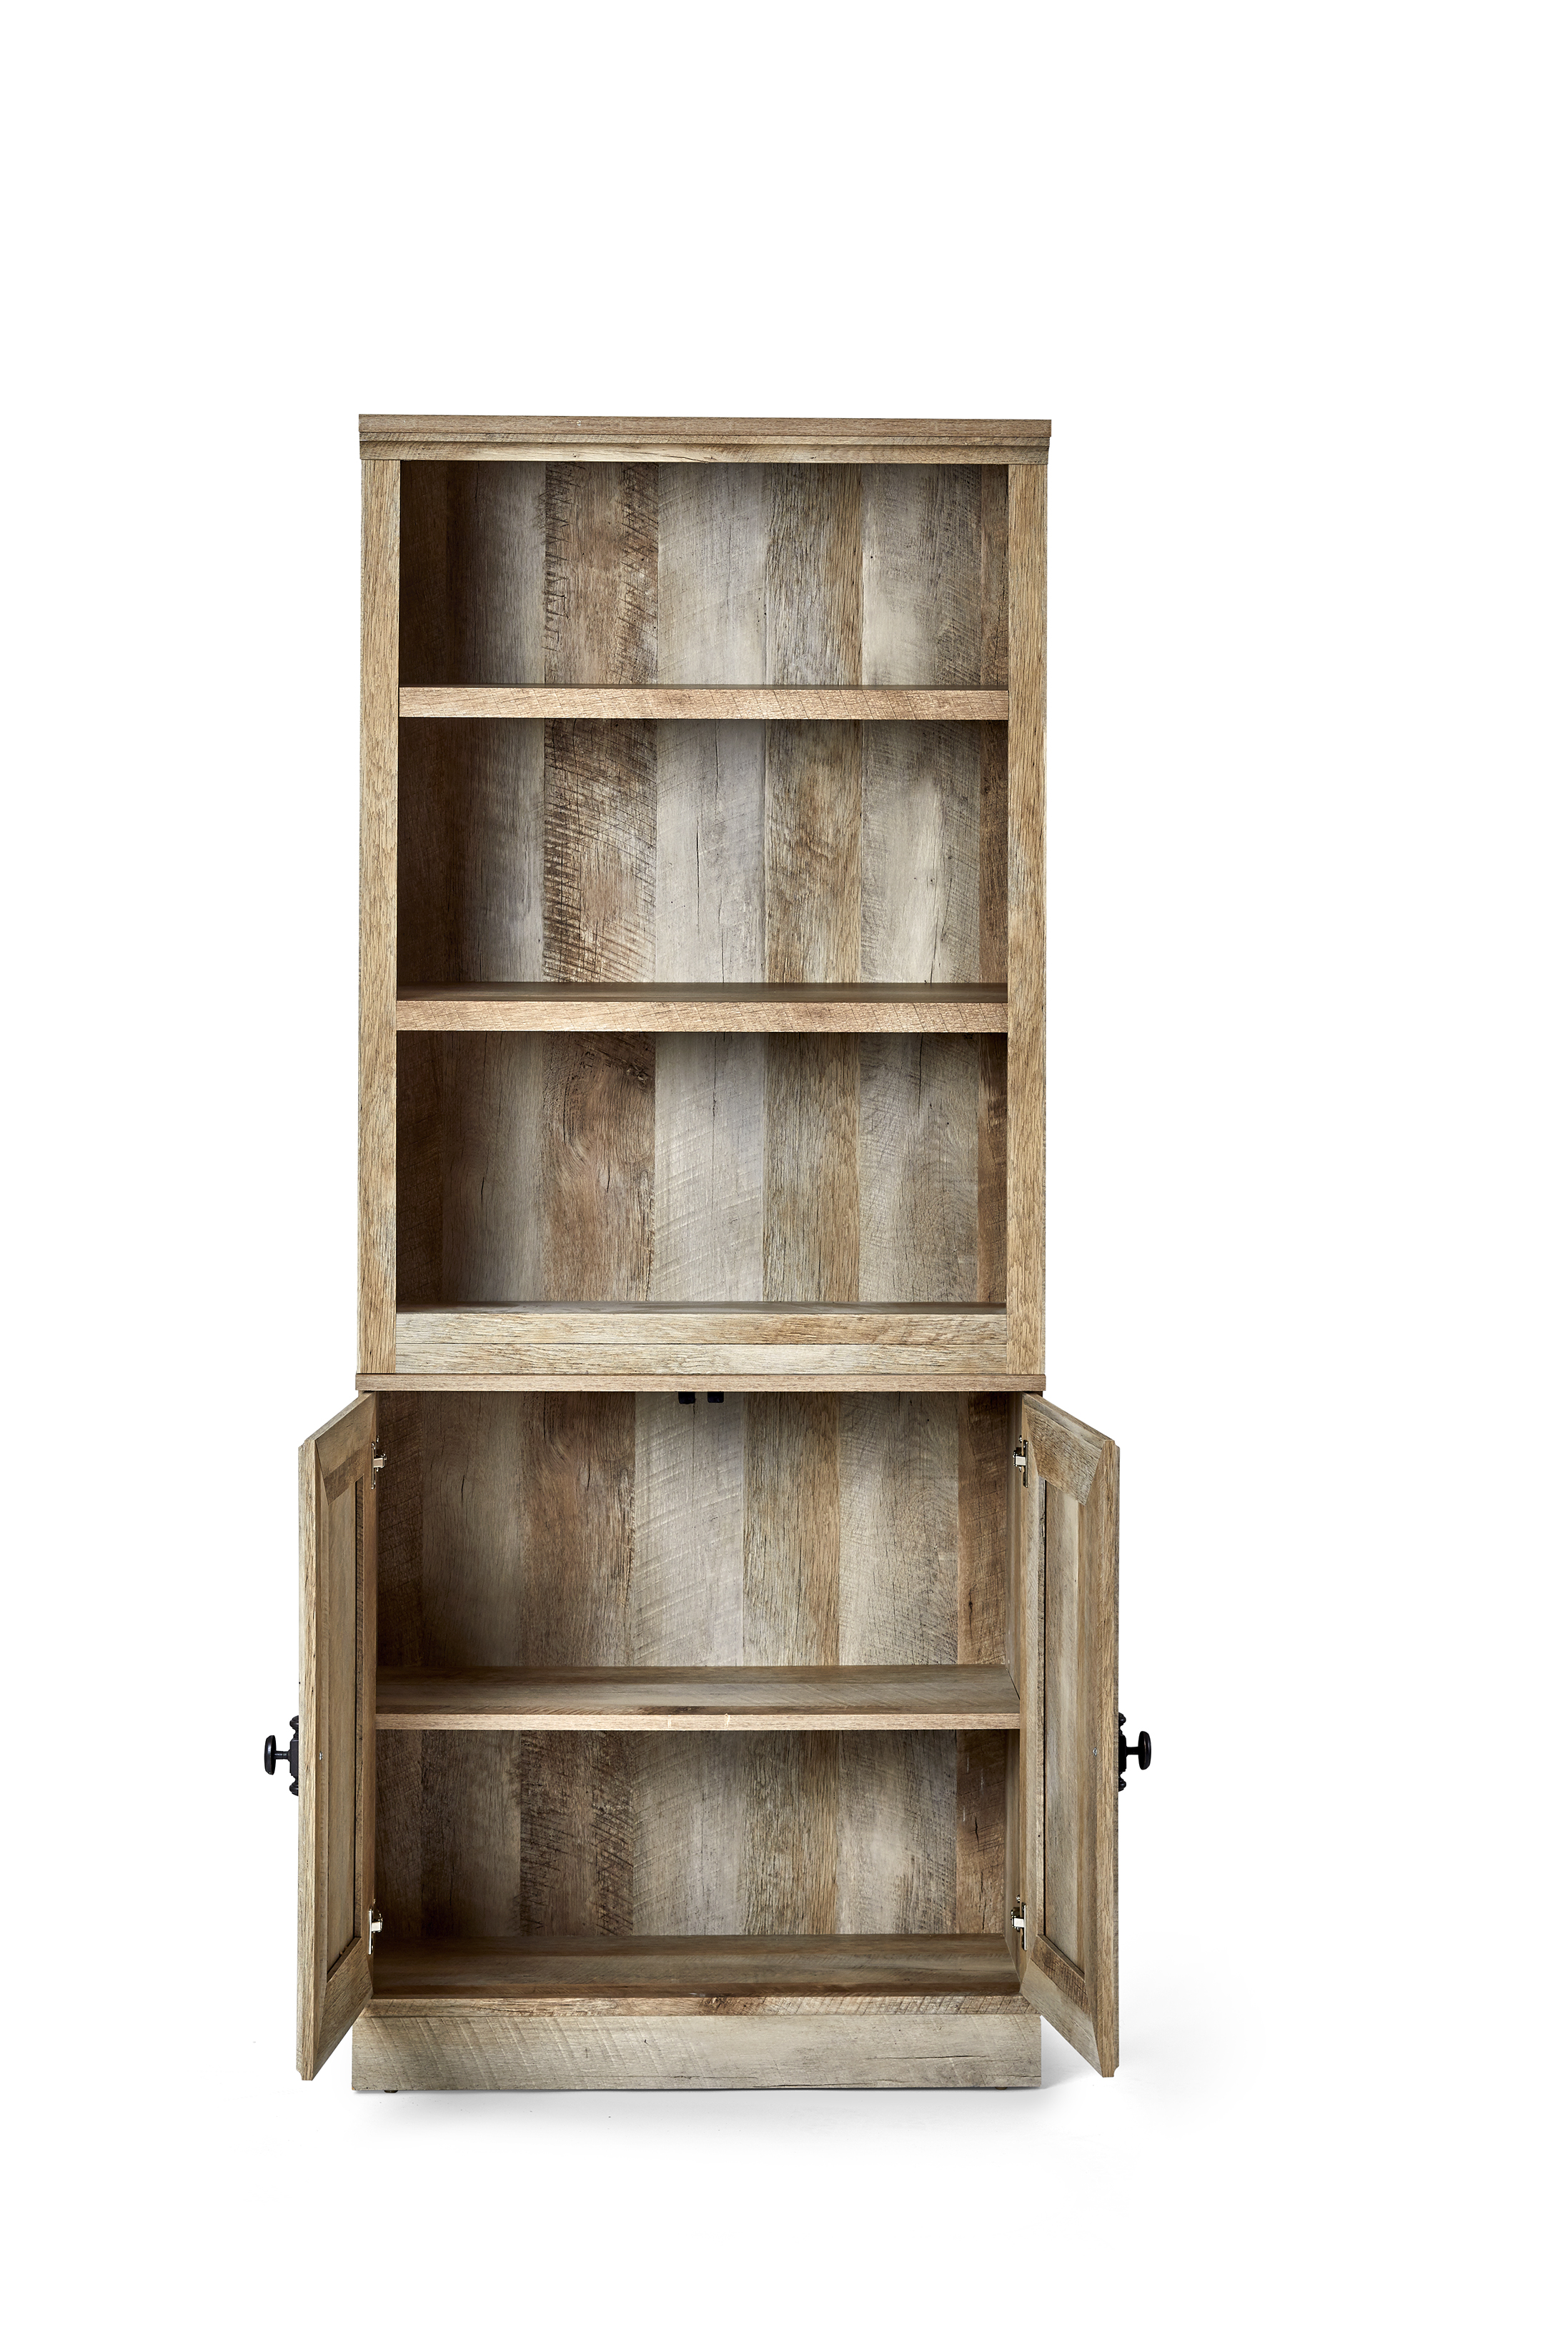 Better Homes & Gardens 71" Crossmill 5 Shelf Bookcase with Doors, Weathered Wood Finish - image 5 of 10